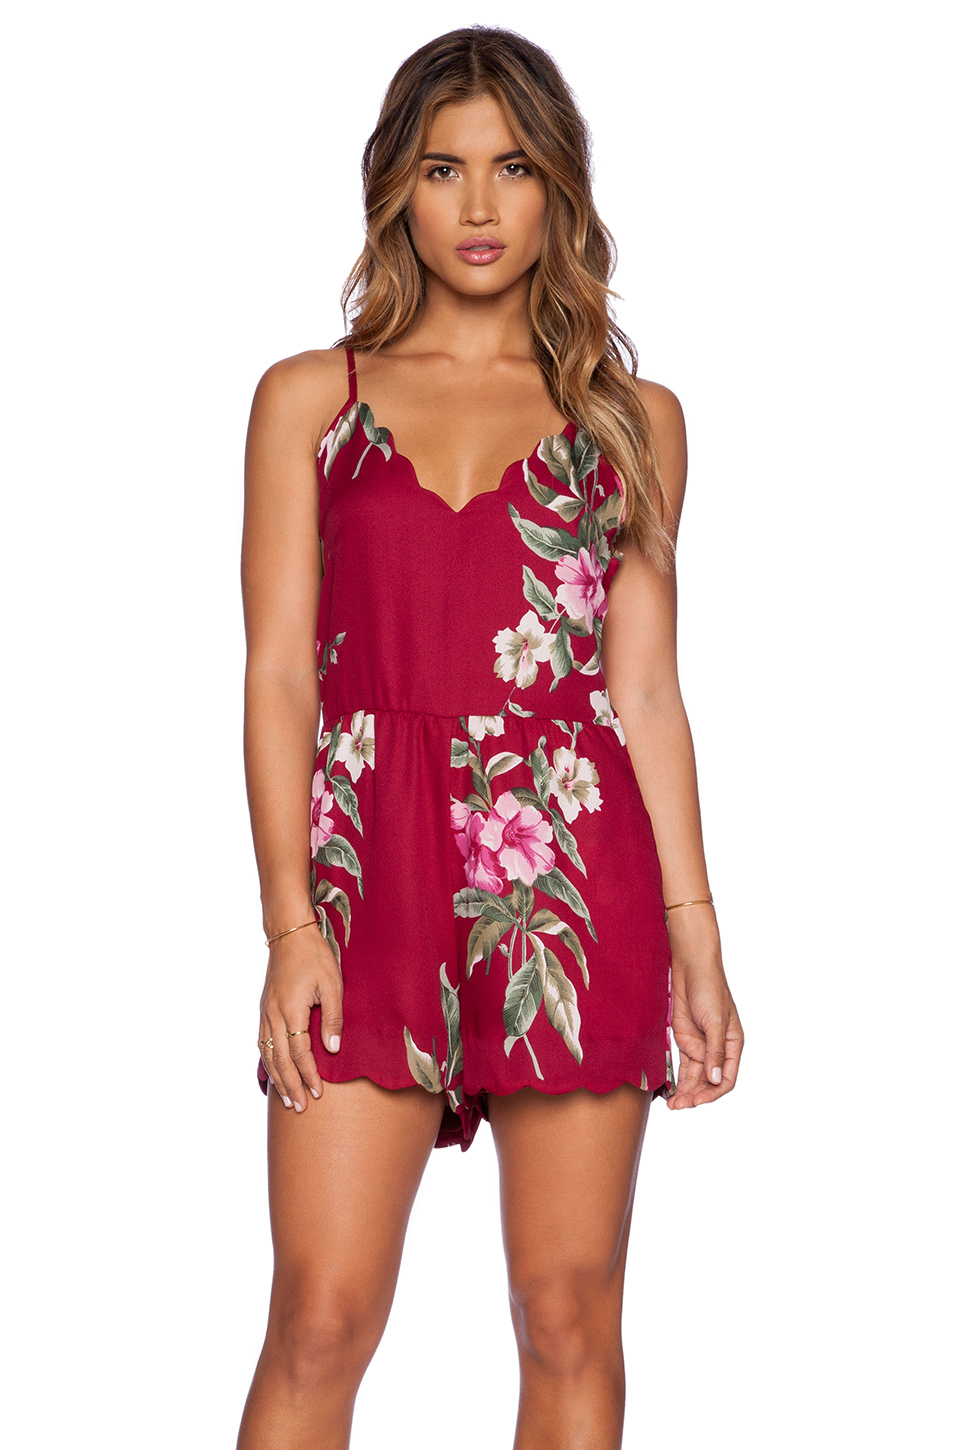 Lyst - Band Of Gypsies Floral Romper in Red